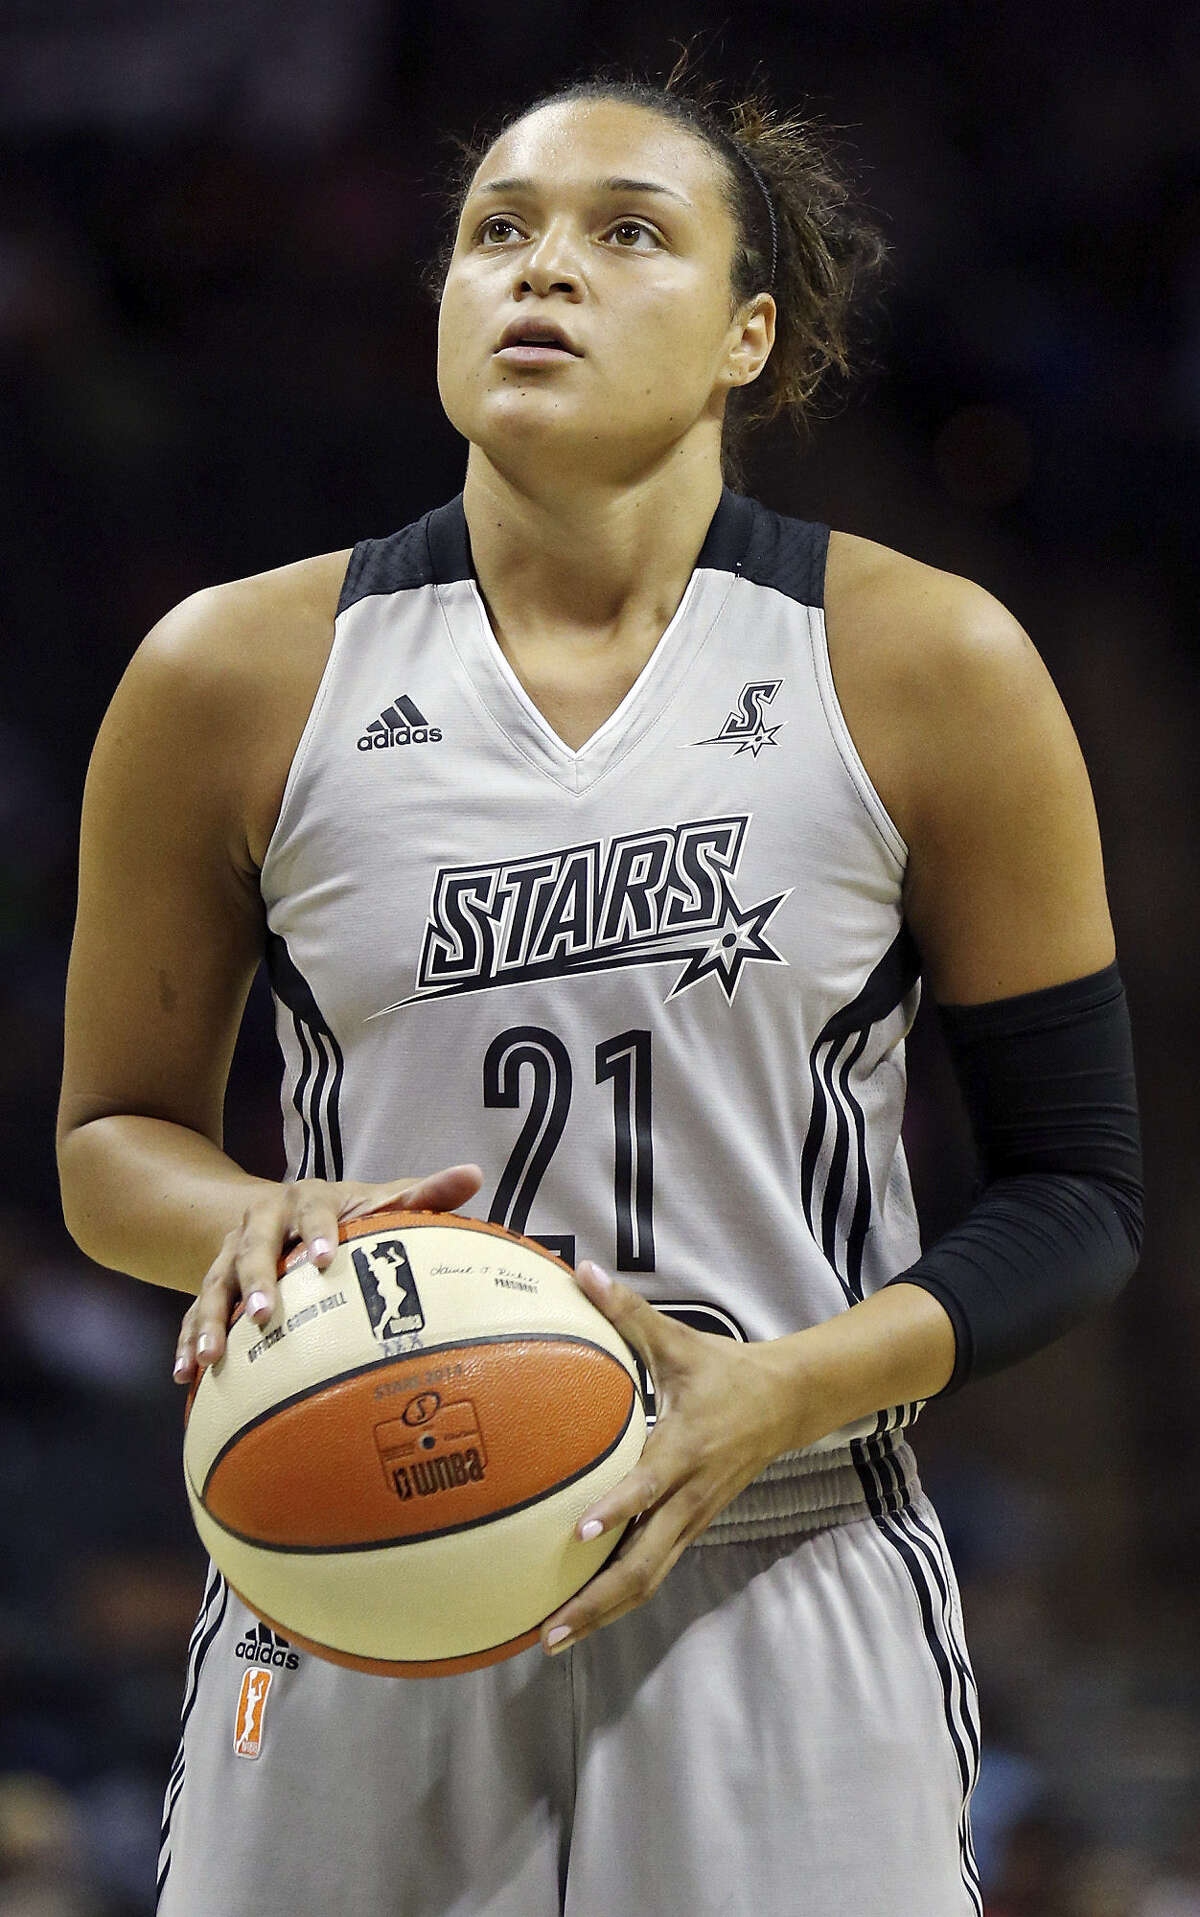 Kayla McBride scored 442 points this season, the most by a Stars rookie since 2003.